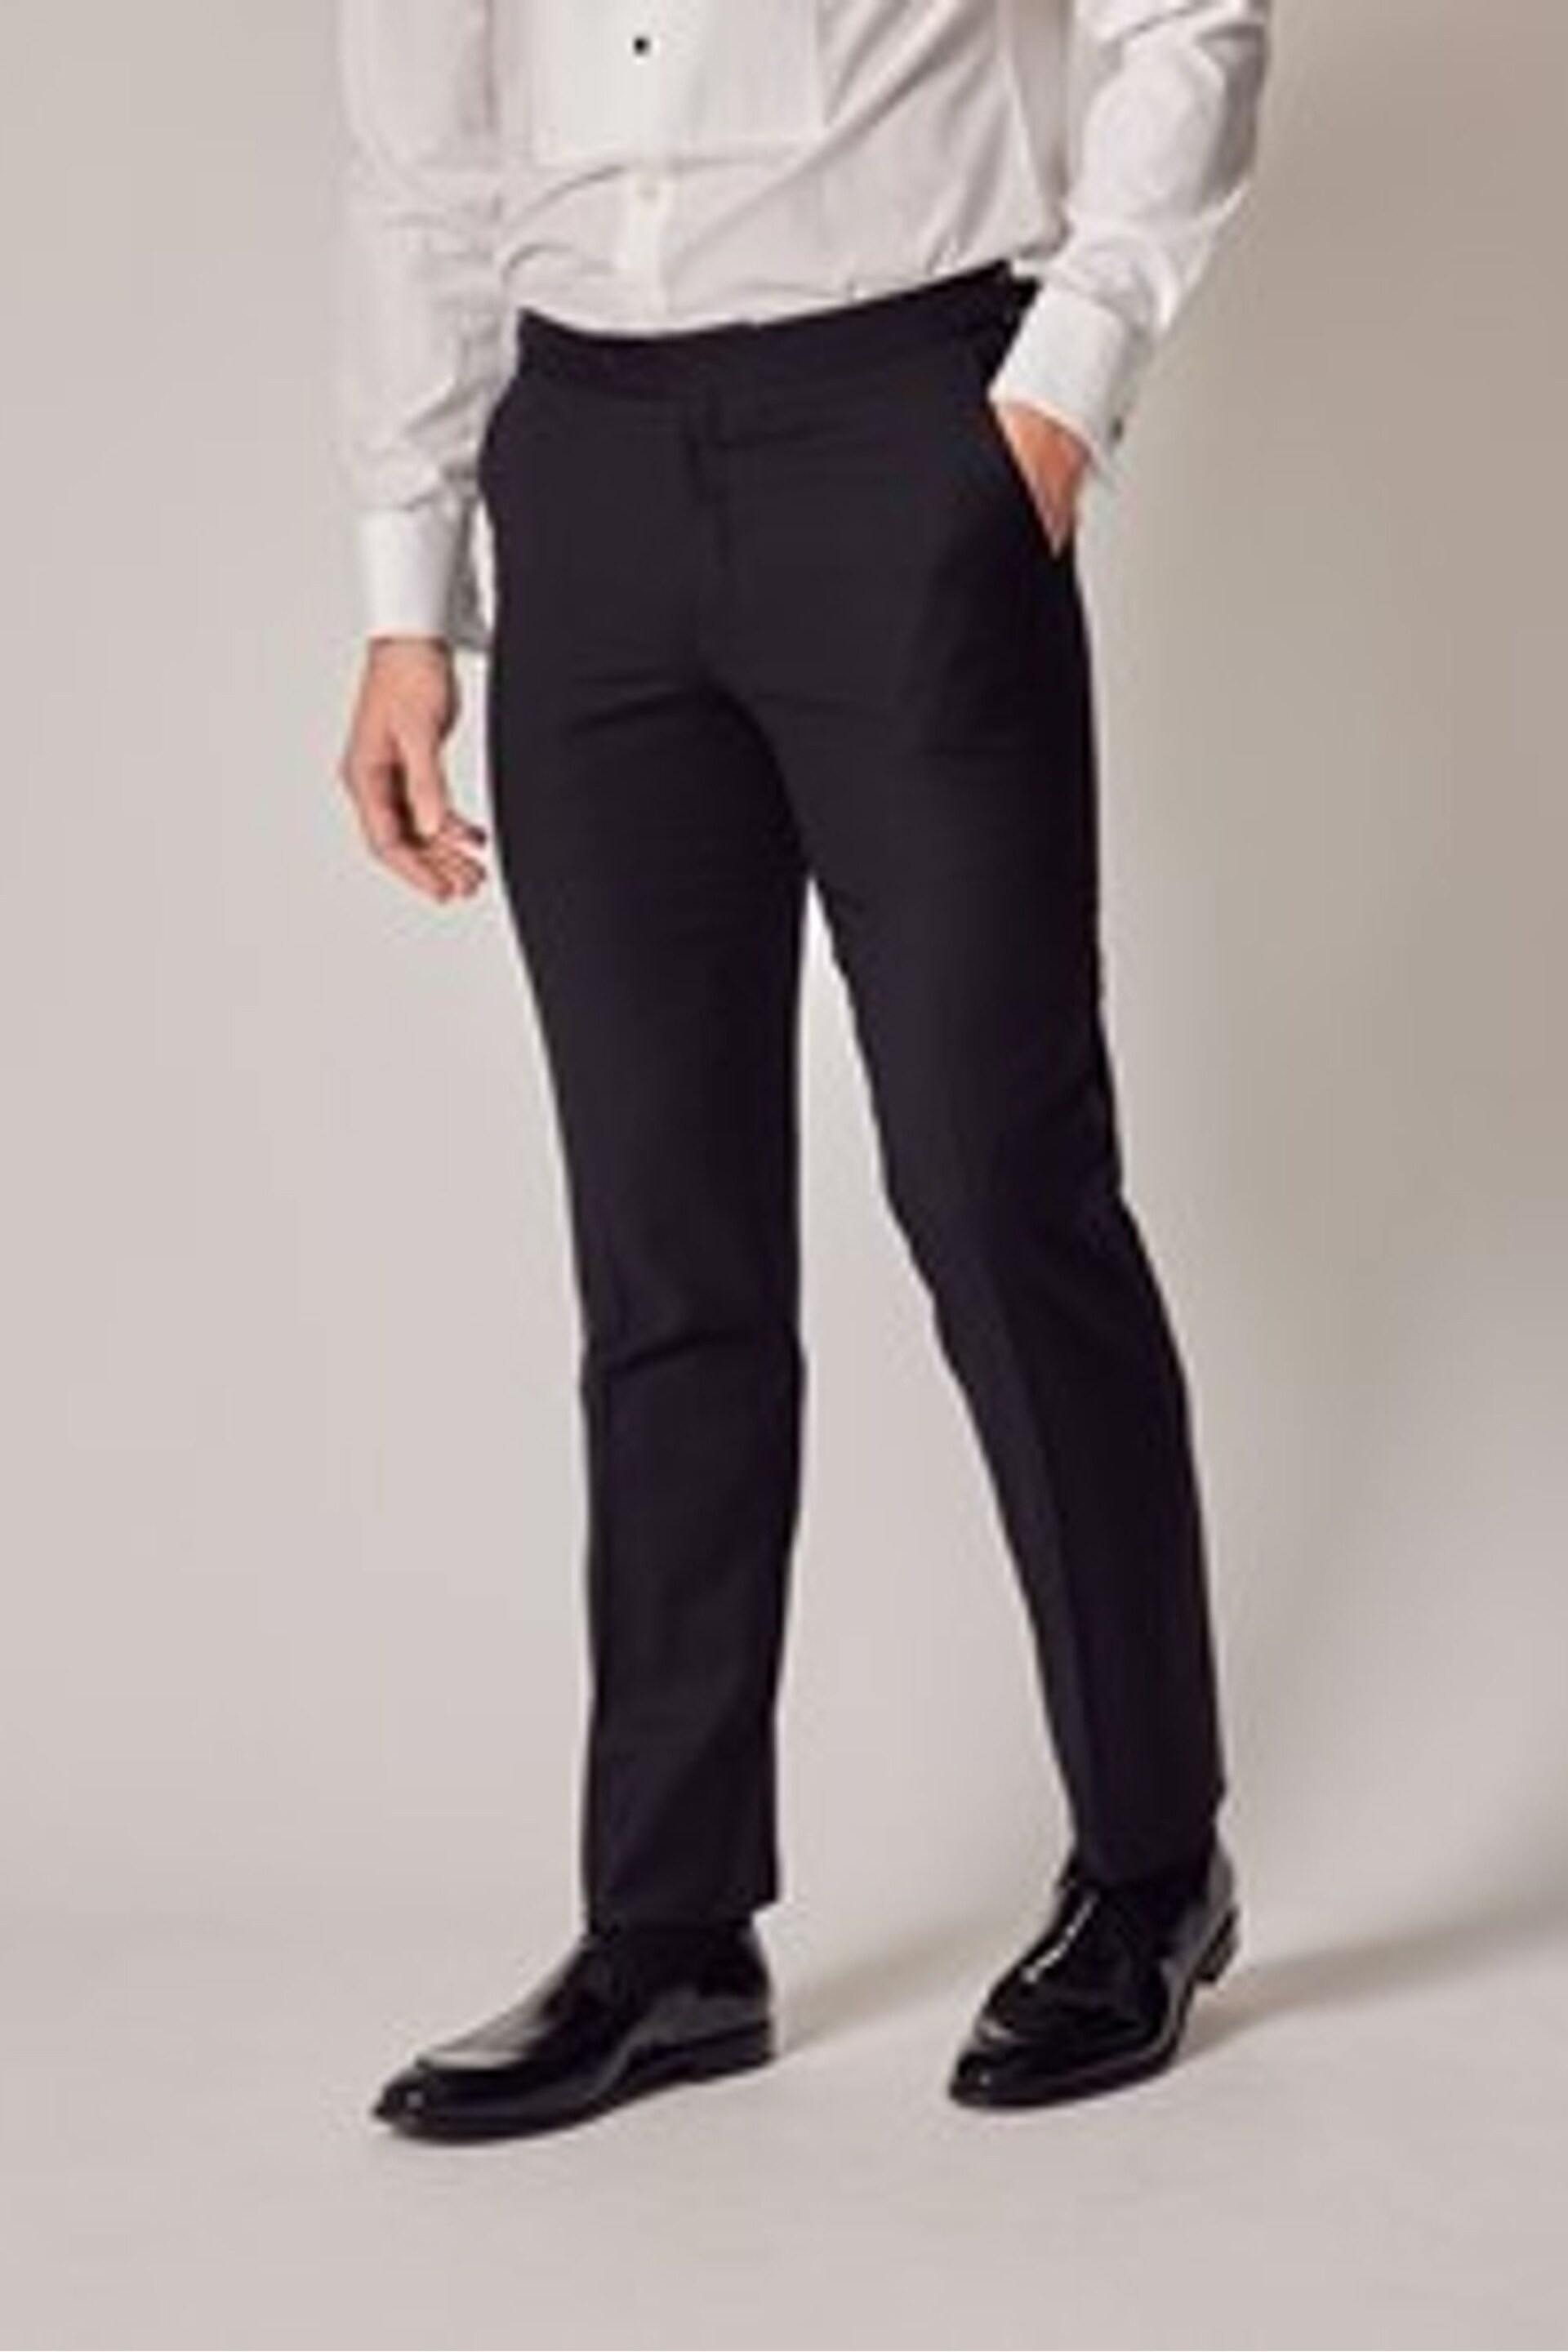 Hawes & Curtis Slim Dinner Suit Black Trousers With Side Adjusters - Image 1 of 4